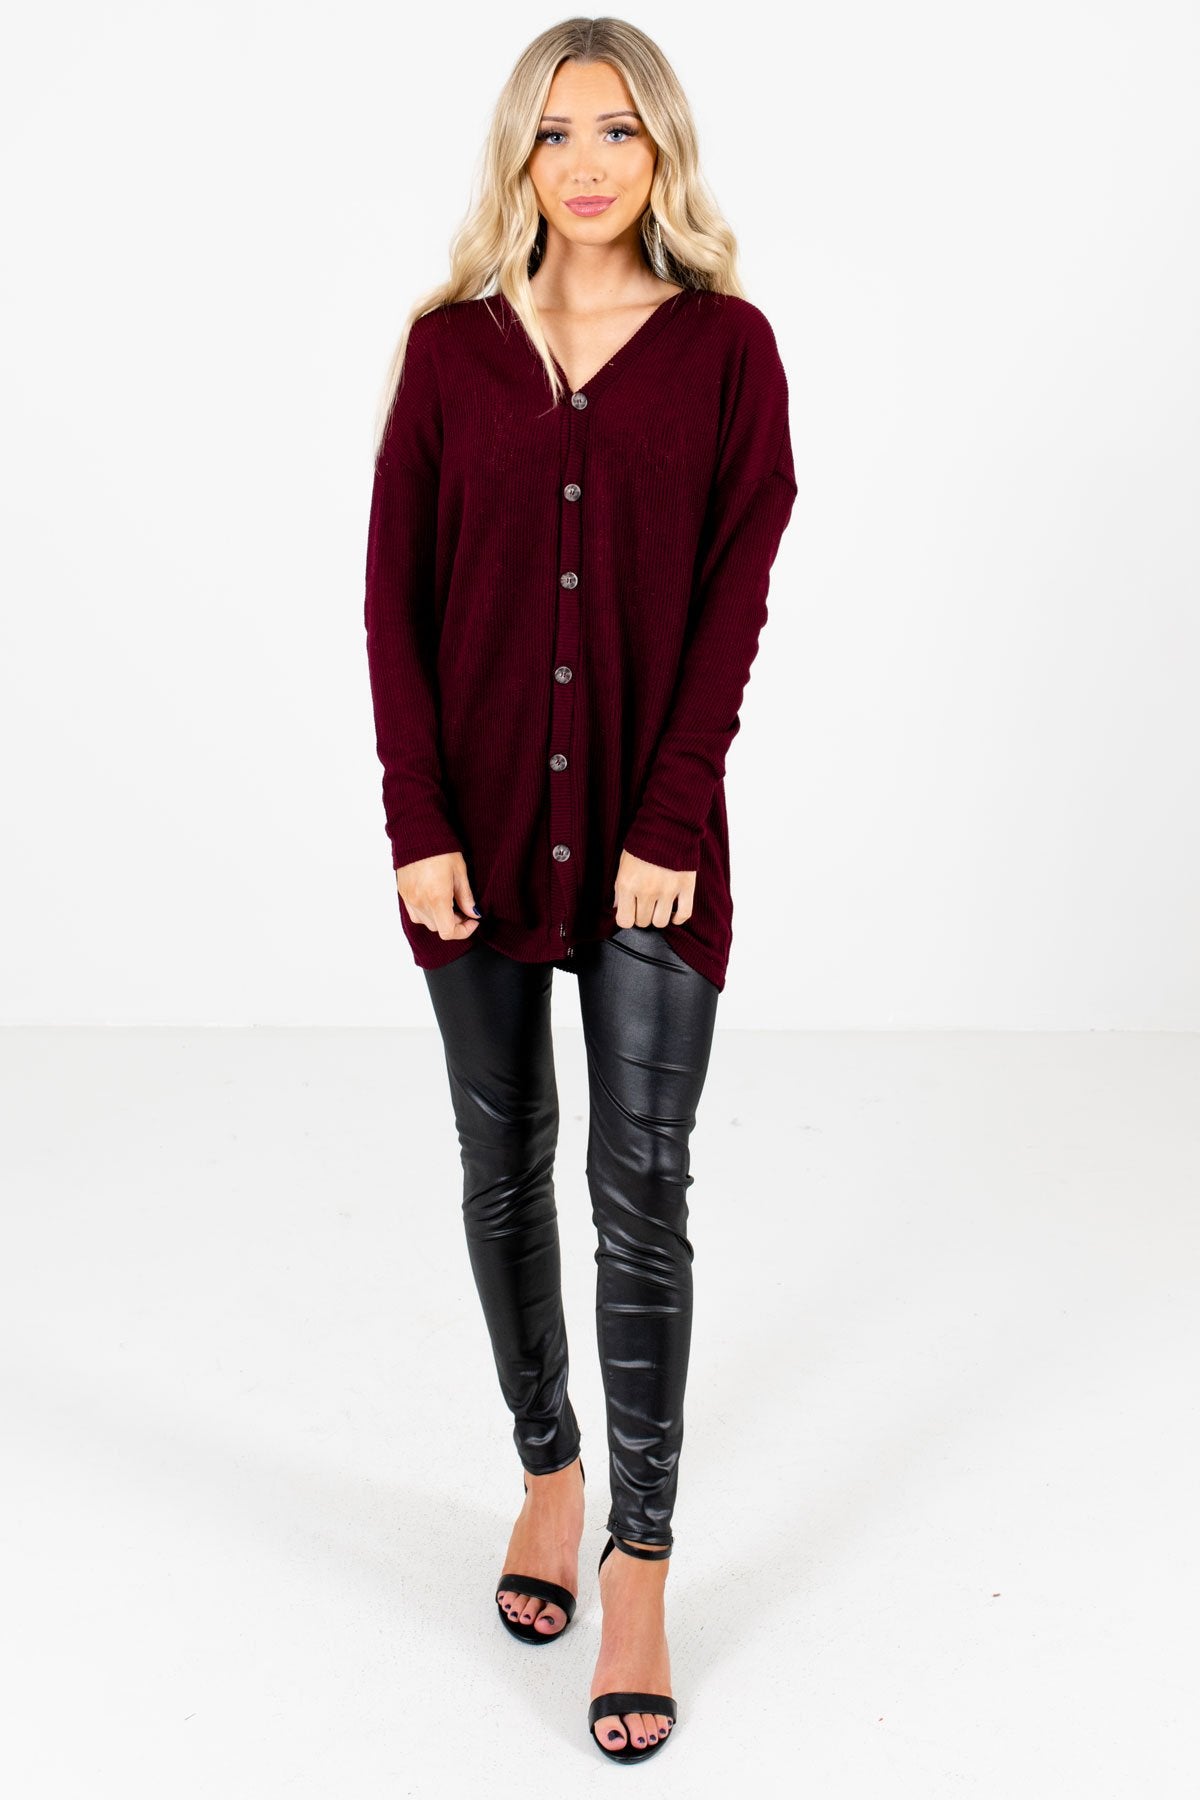 Burgundy Cute and Comfortable Boutique Tops for Women